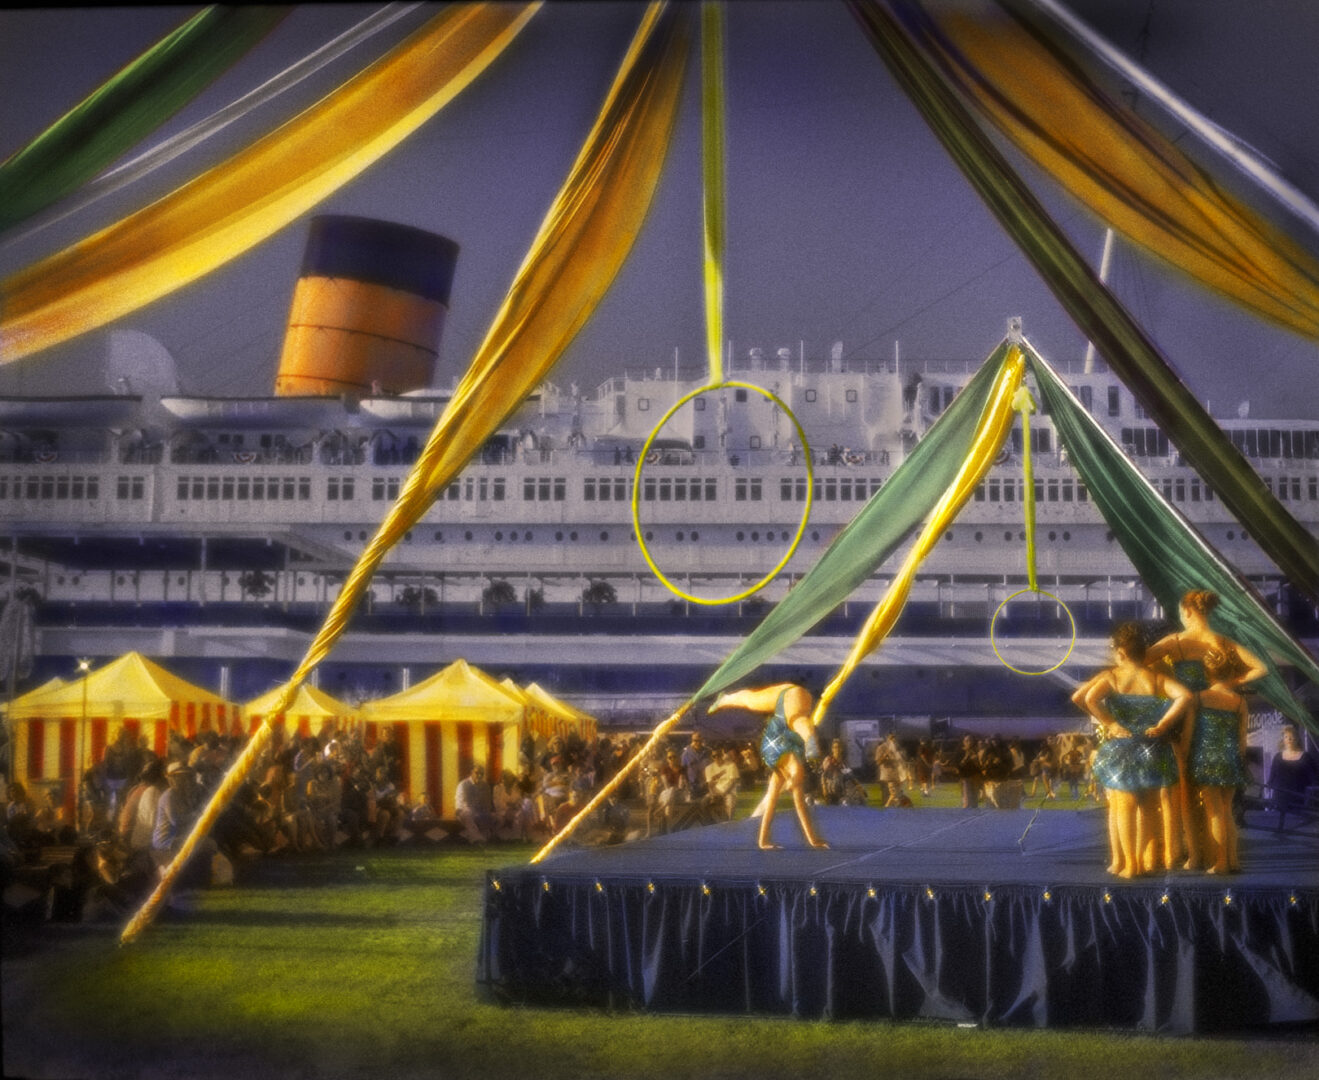 A large ship with yellow and green decorations.